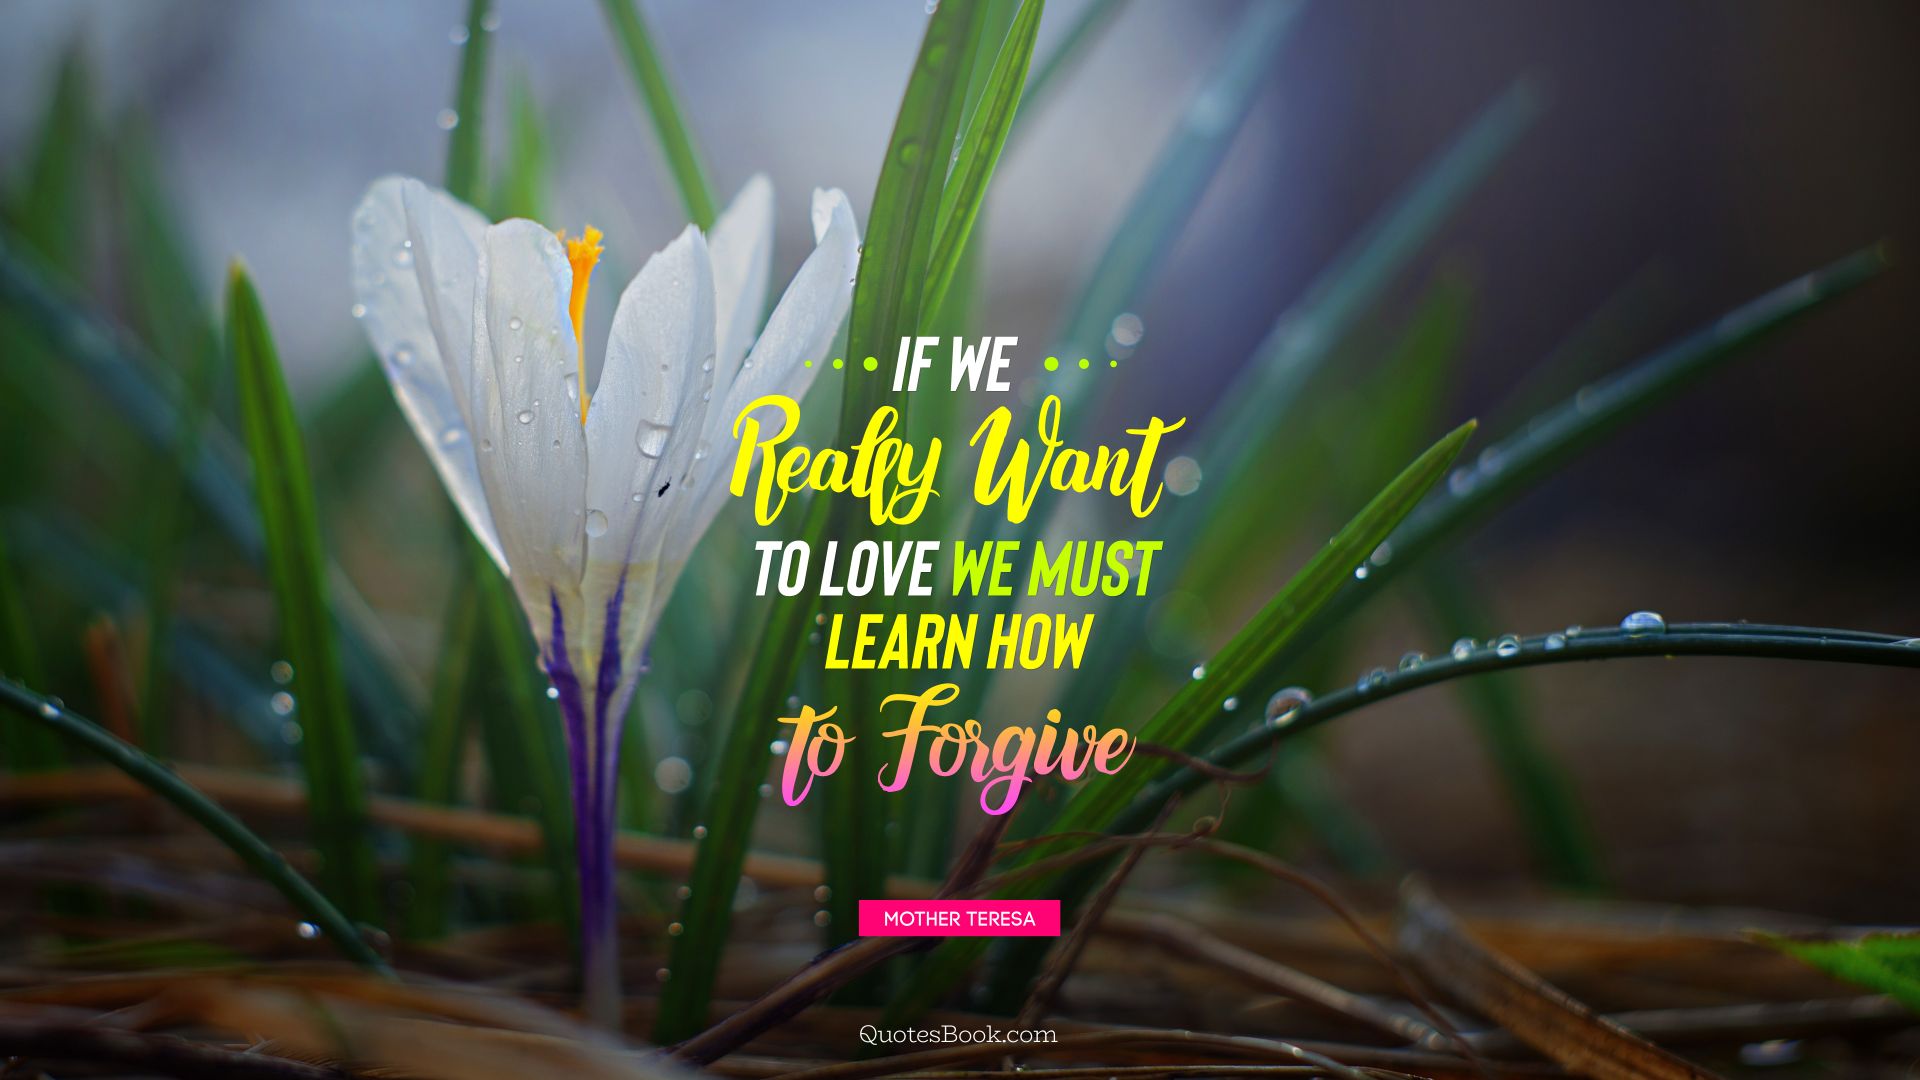 If we really want to love we must learn how to forgive. - Quote by Mother Teresa